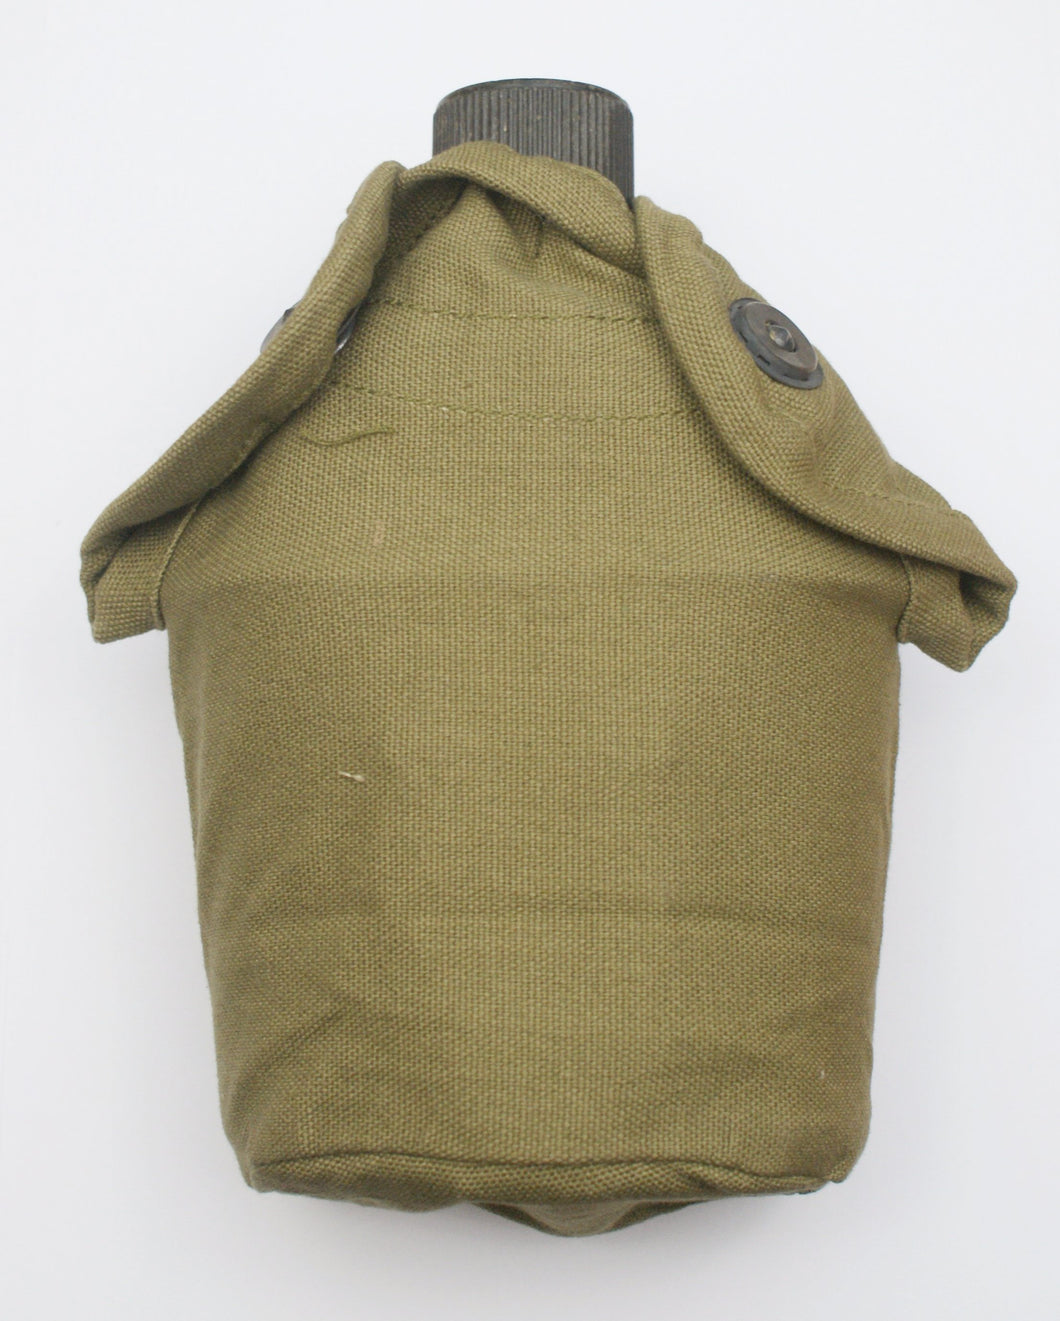 USMC 2nd Pattern Canteen Cover